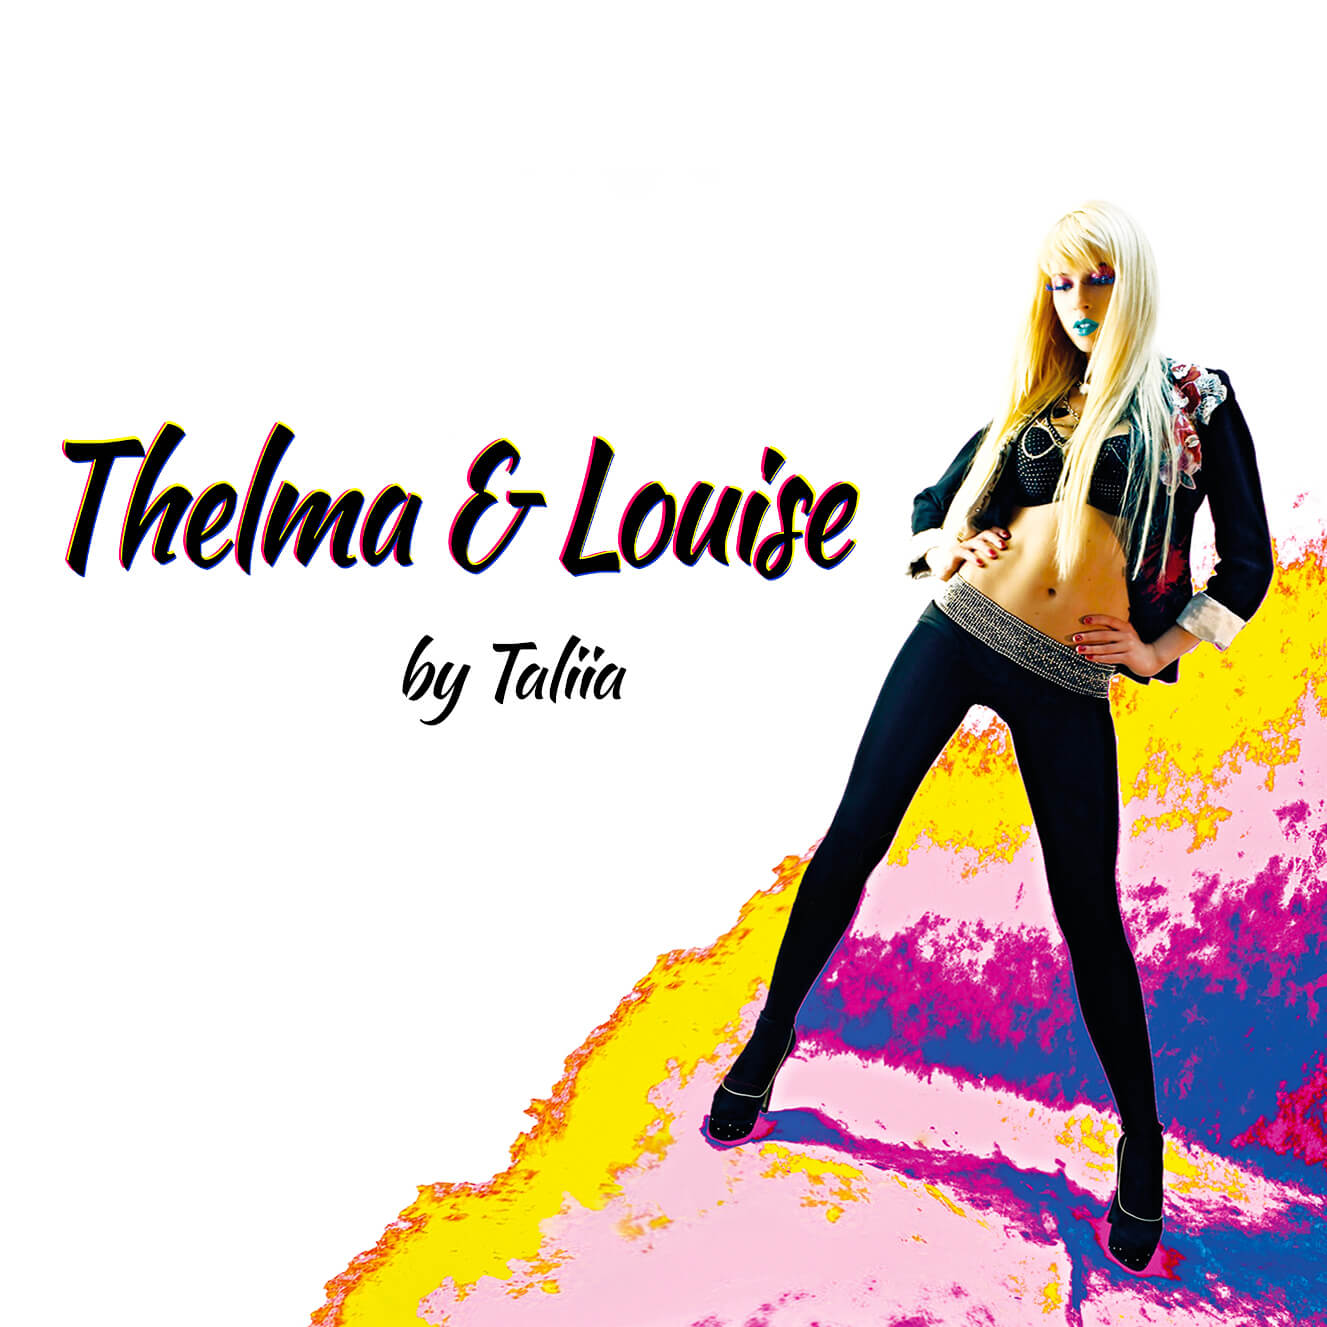 Thelma & Louise Official Artwork